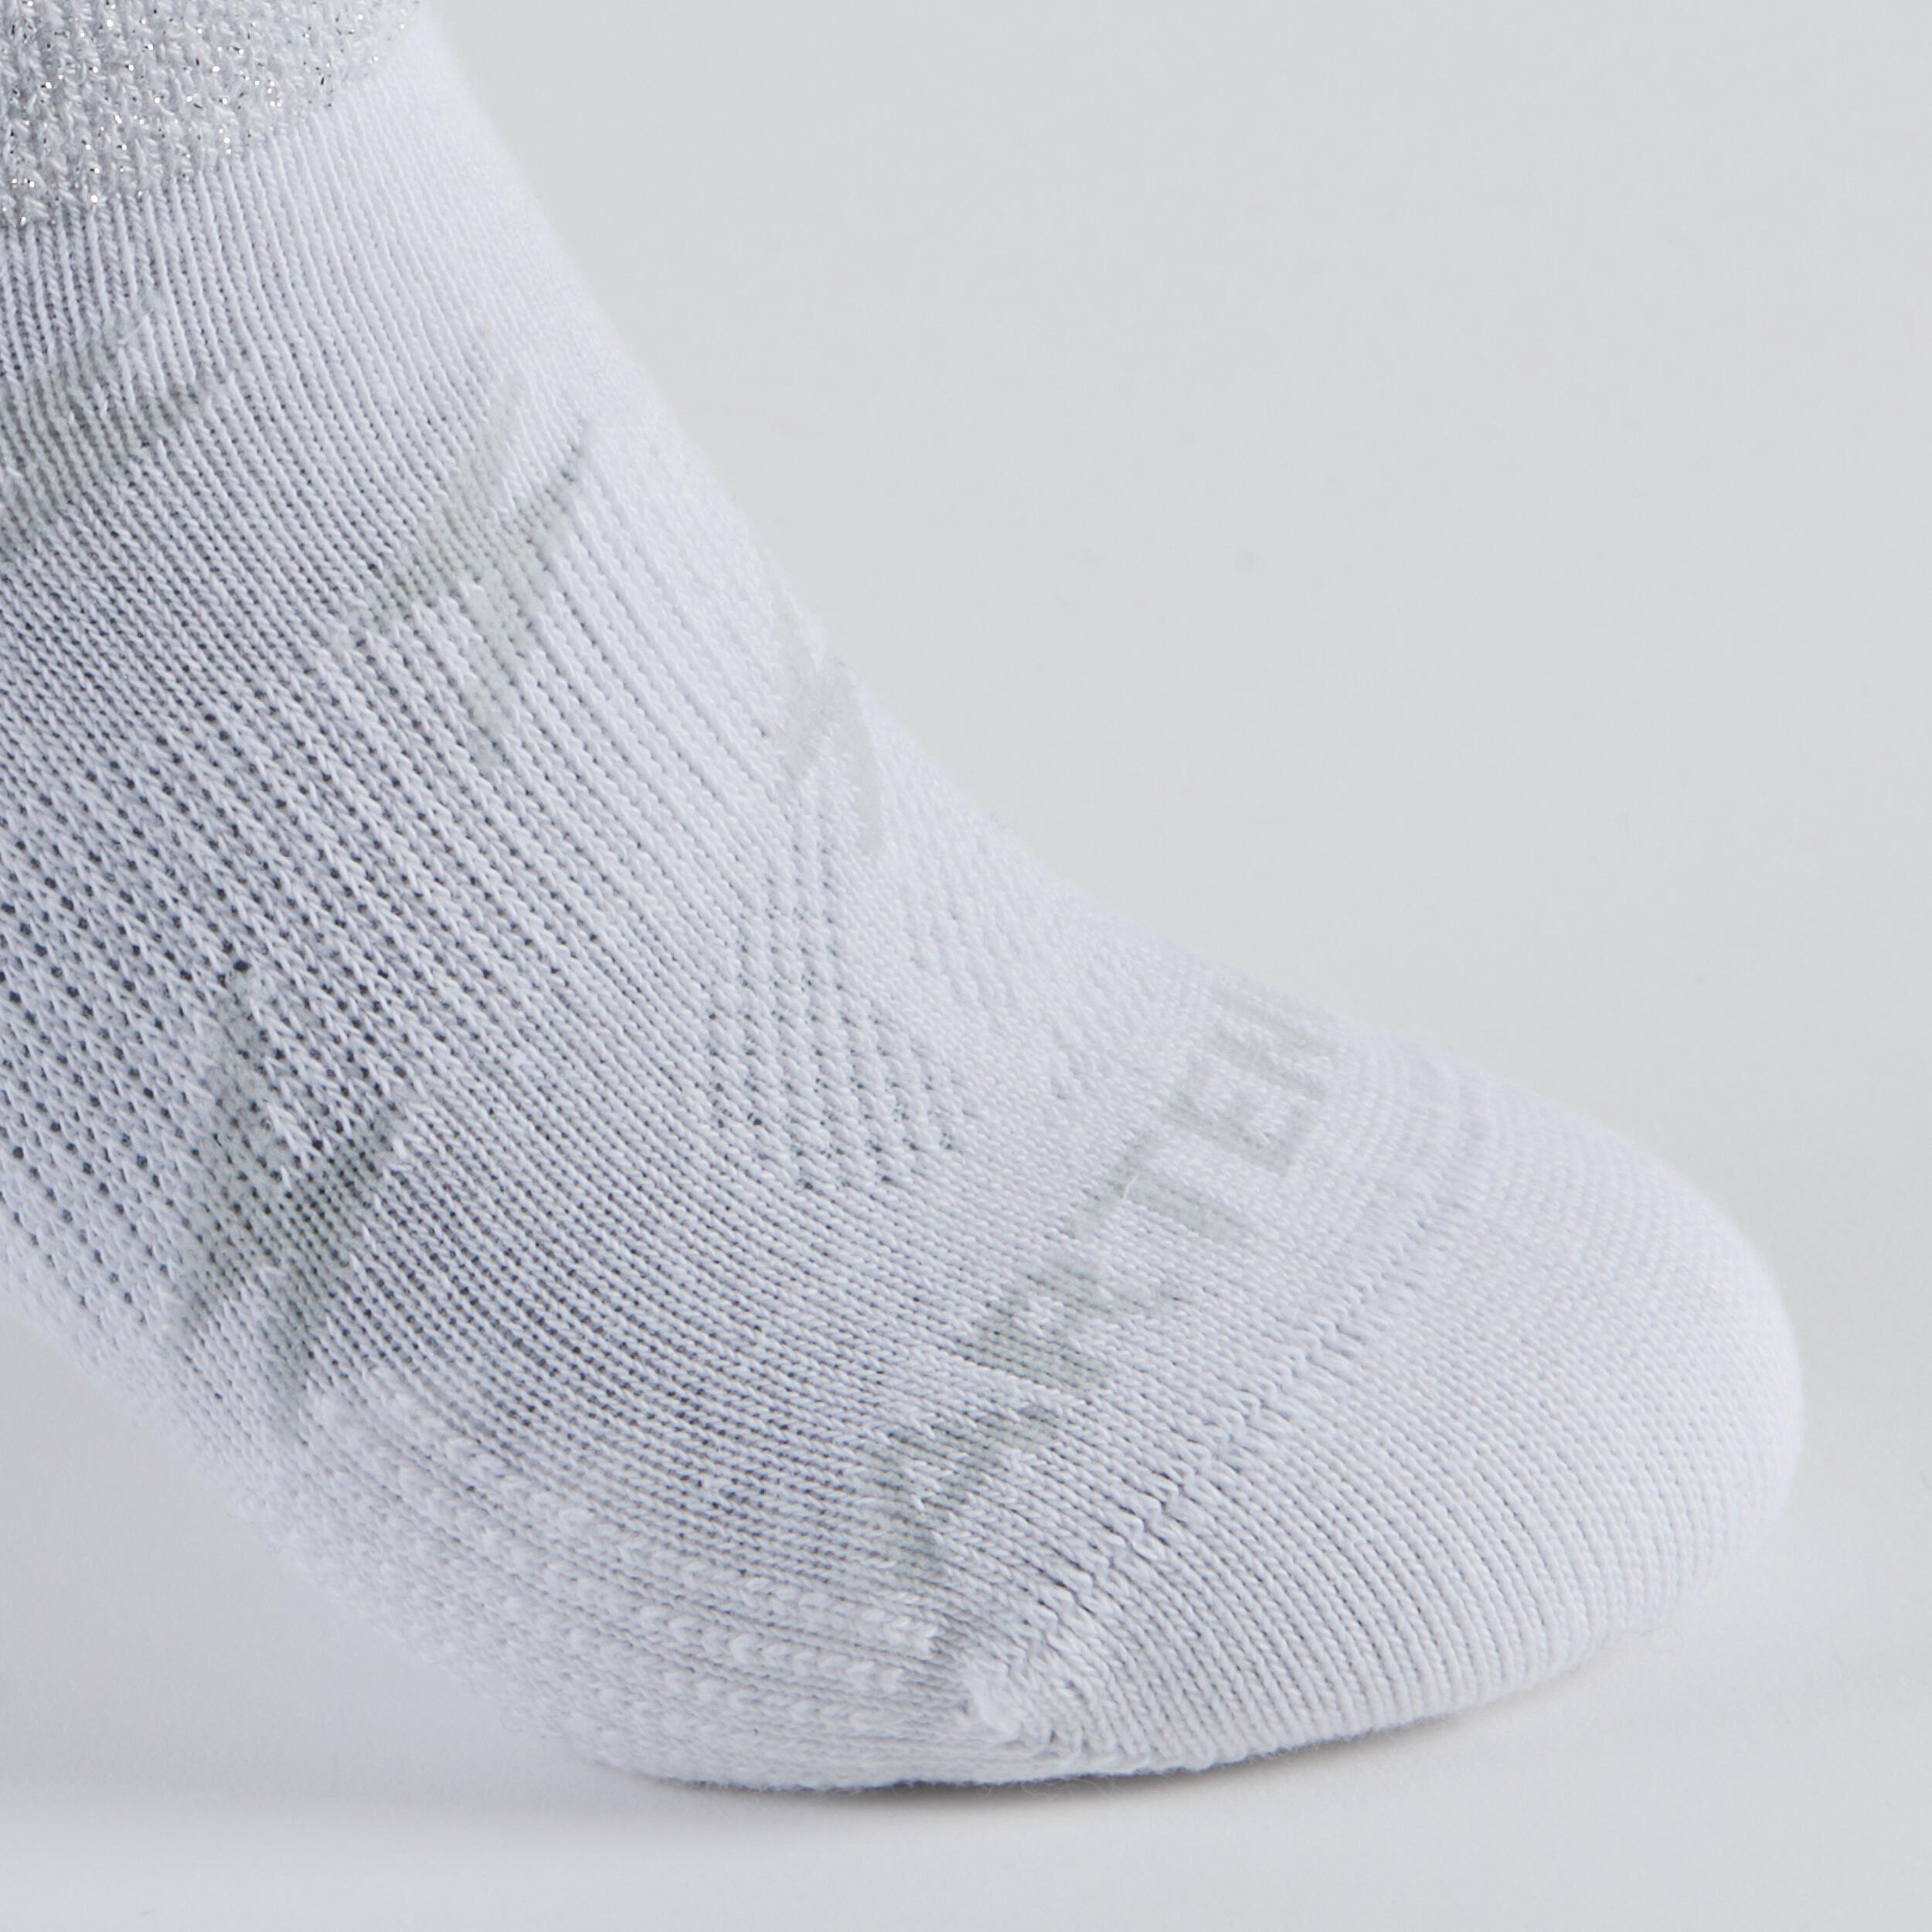 Kids' Low Tennis Socks Tri-Pack RS 160 - White with Patterns 5/14